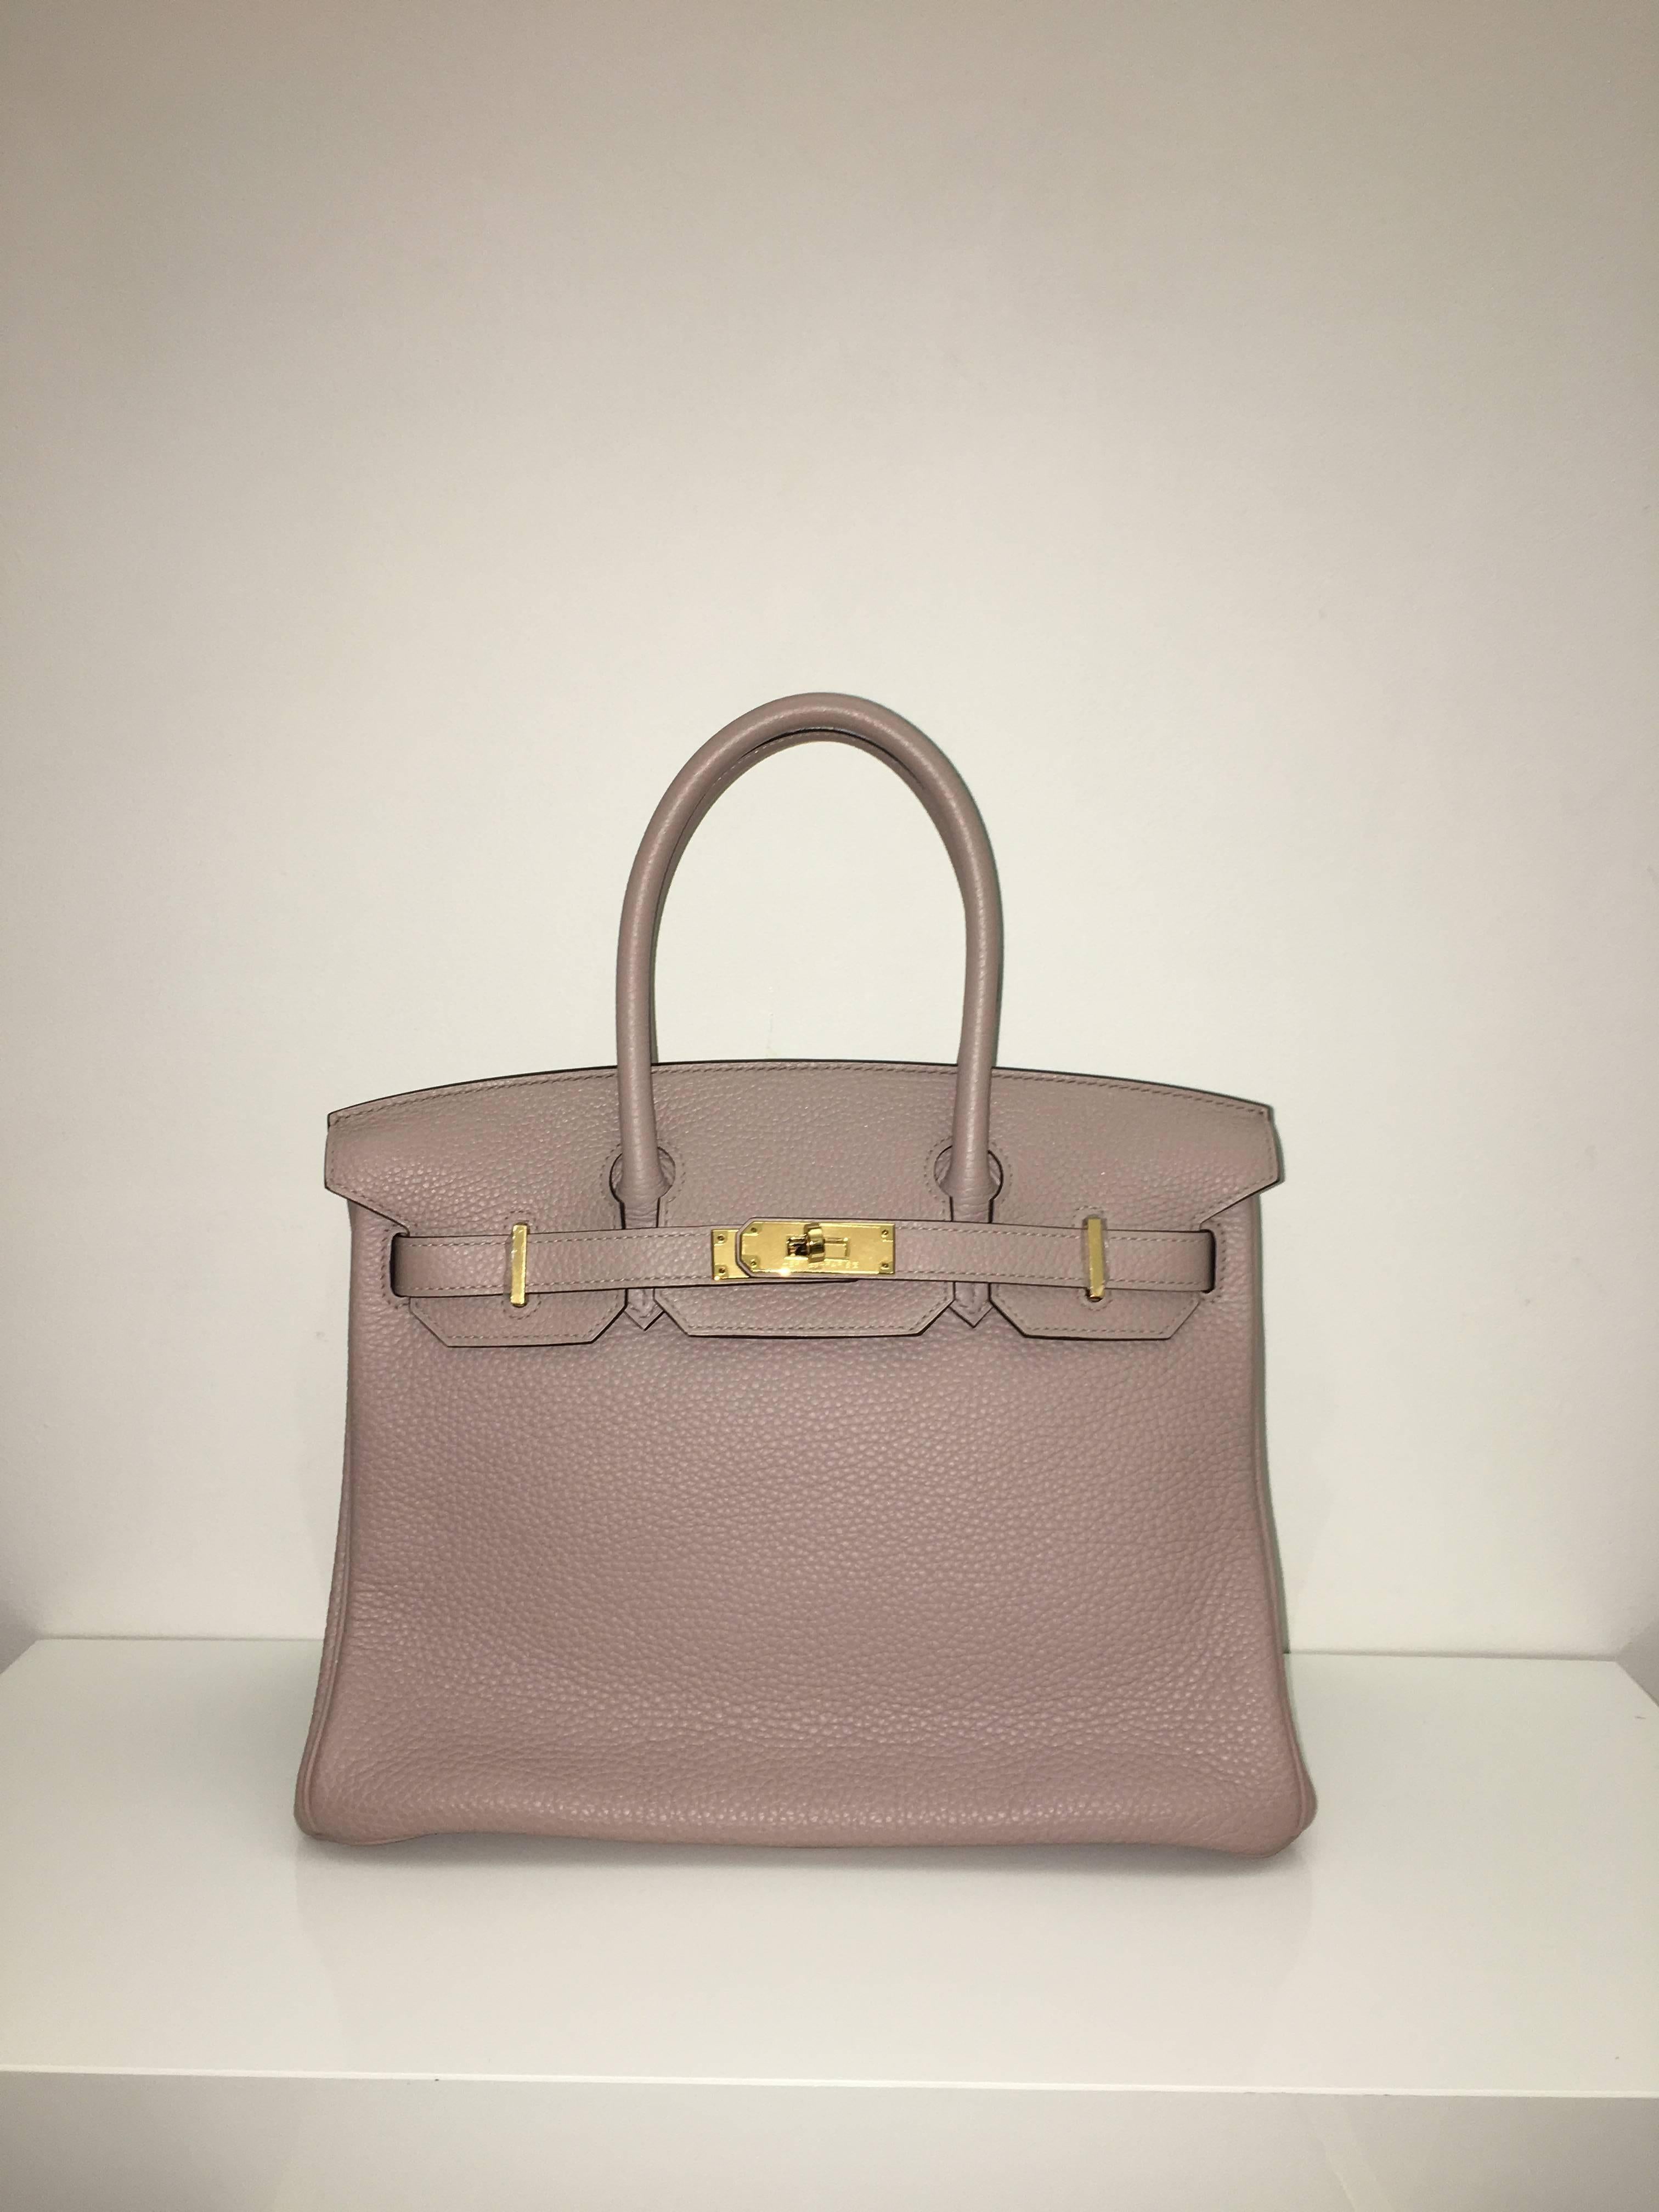 Hermes 
Birkin Size 30
Togo Leather 
Colour Glycine
Gold Hardware 
store fresh, comes with receipt and full set (dust bag, box...) 
Hydeparkfashion specializes in sourcing and delivering authentic luxury handbags, mainly Hermes, to client